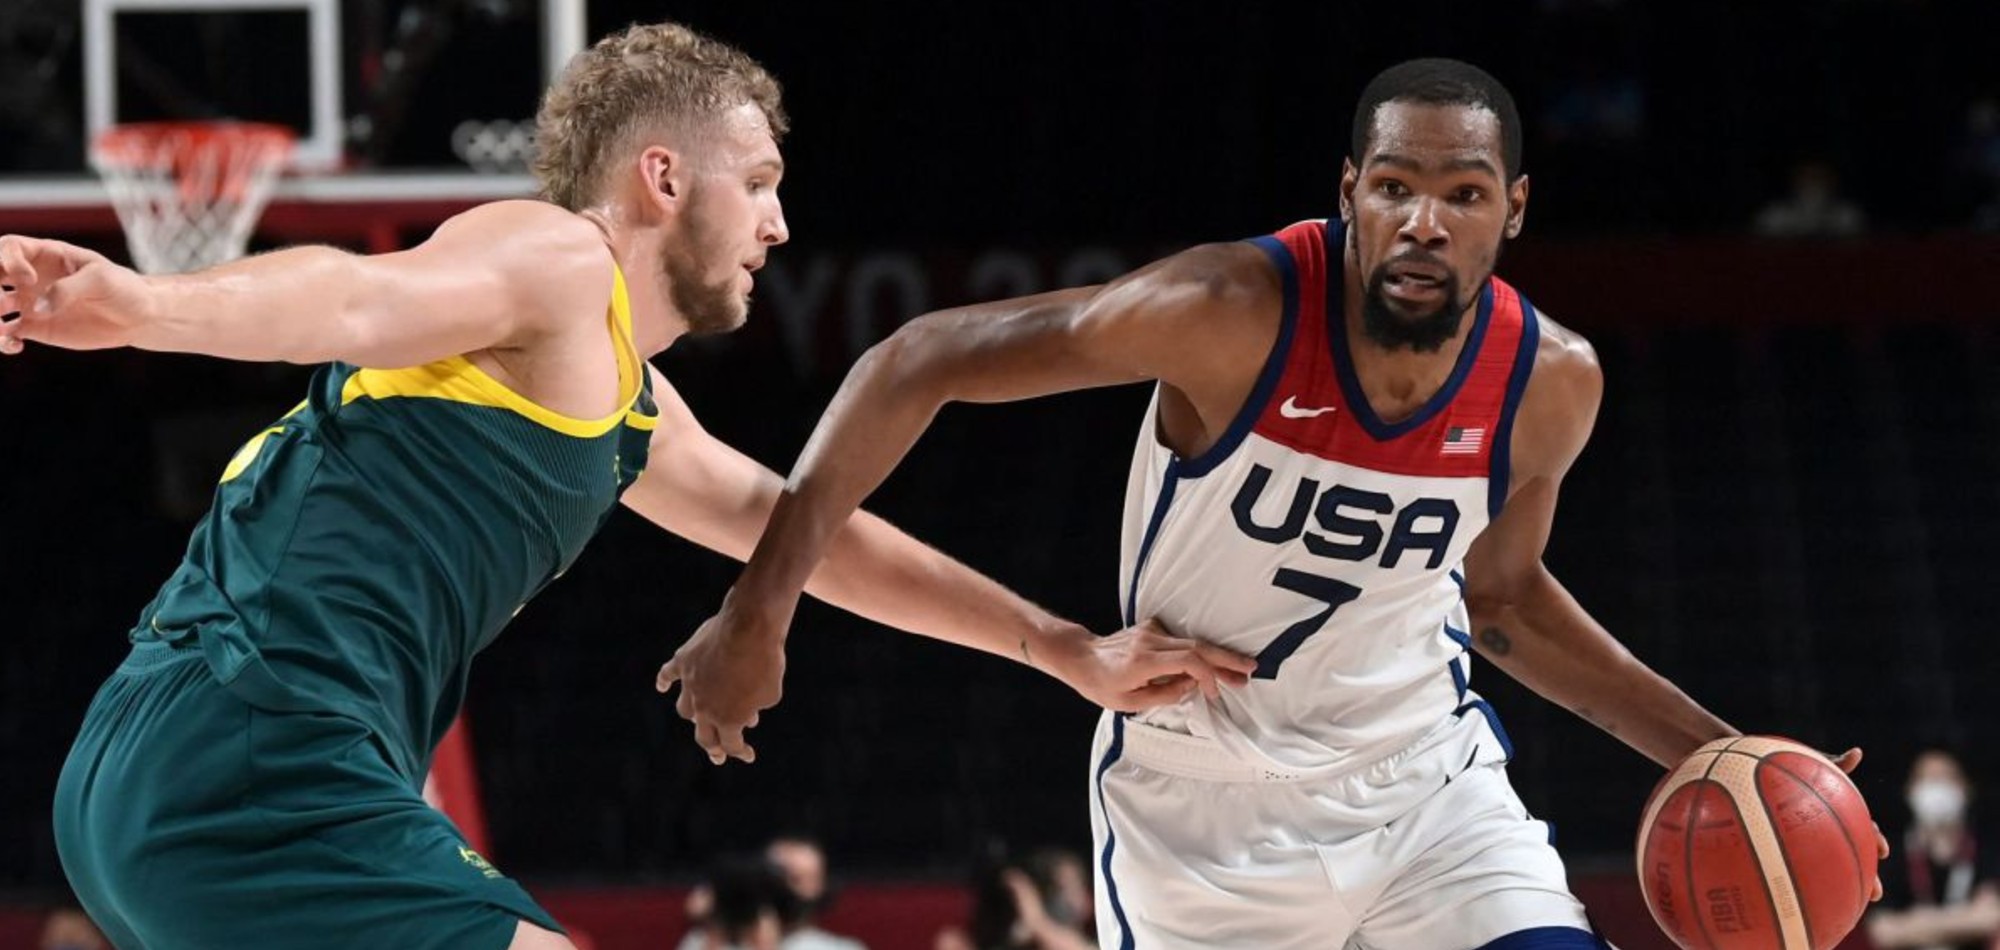 Tokyo Olympics: Team USA beat Australia in basketball semi-final to reach gold-medal game